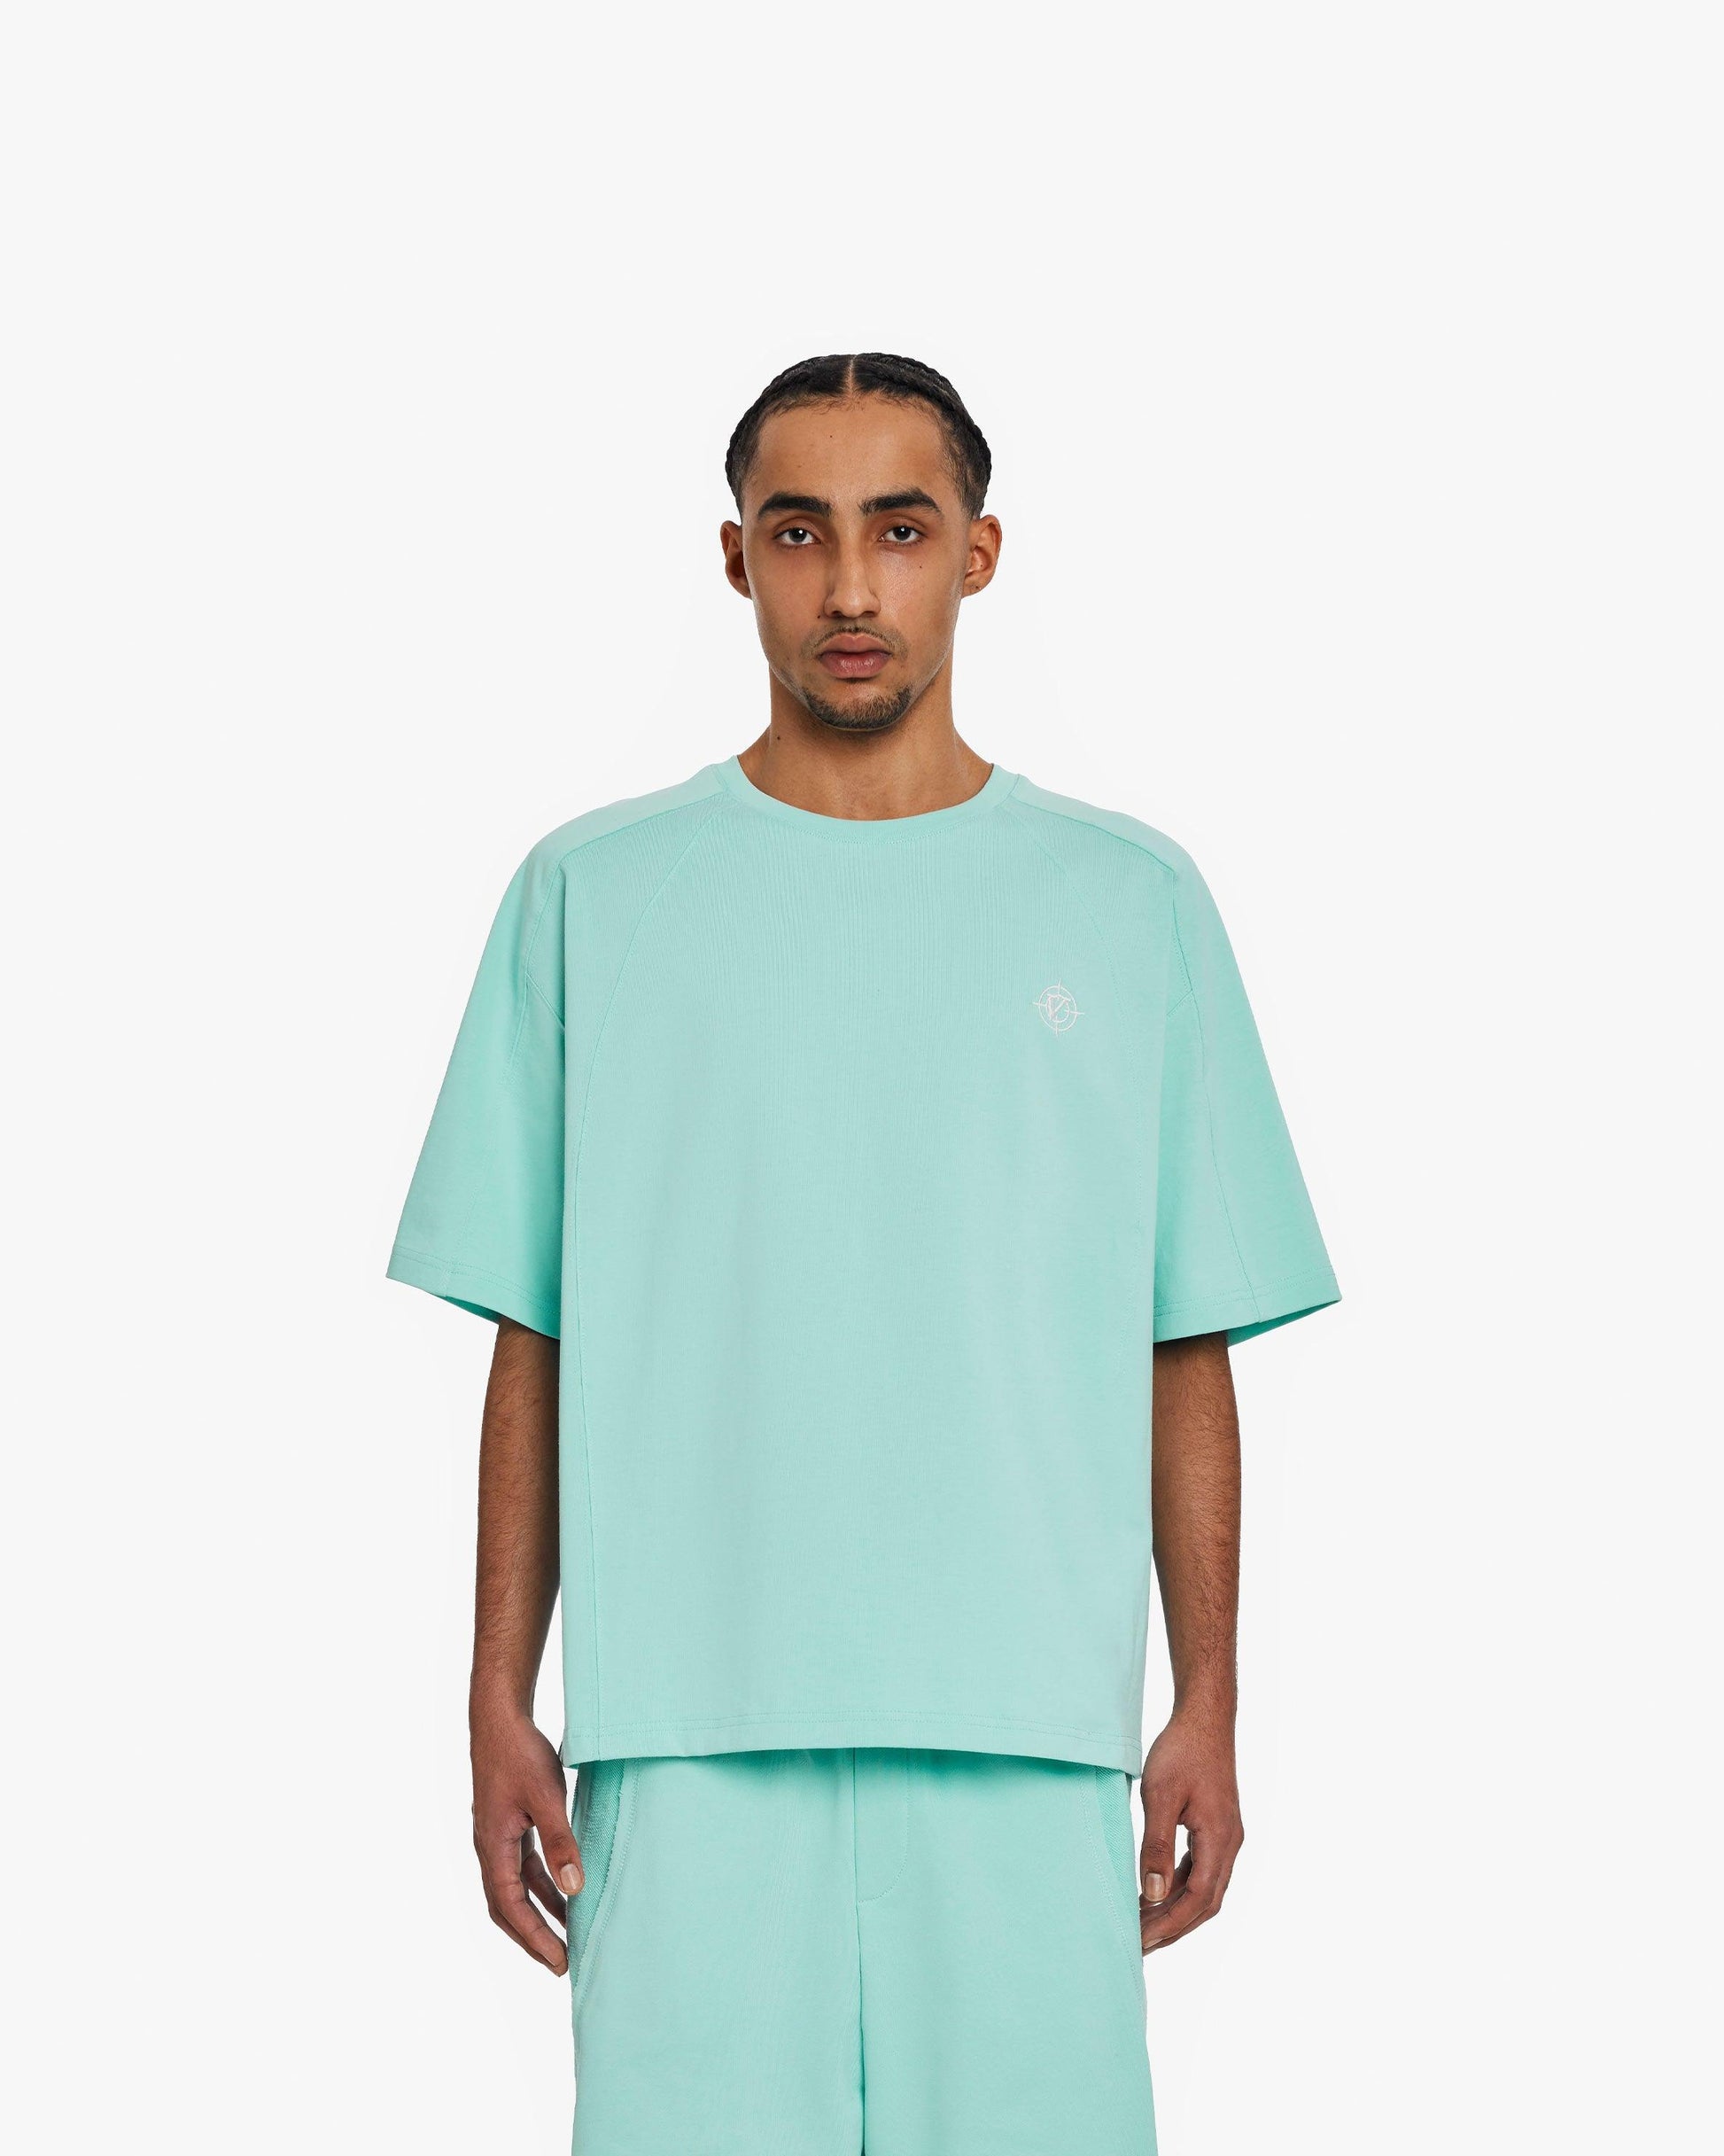 T-SHIRT TURQUOISE - VICINITY